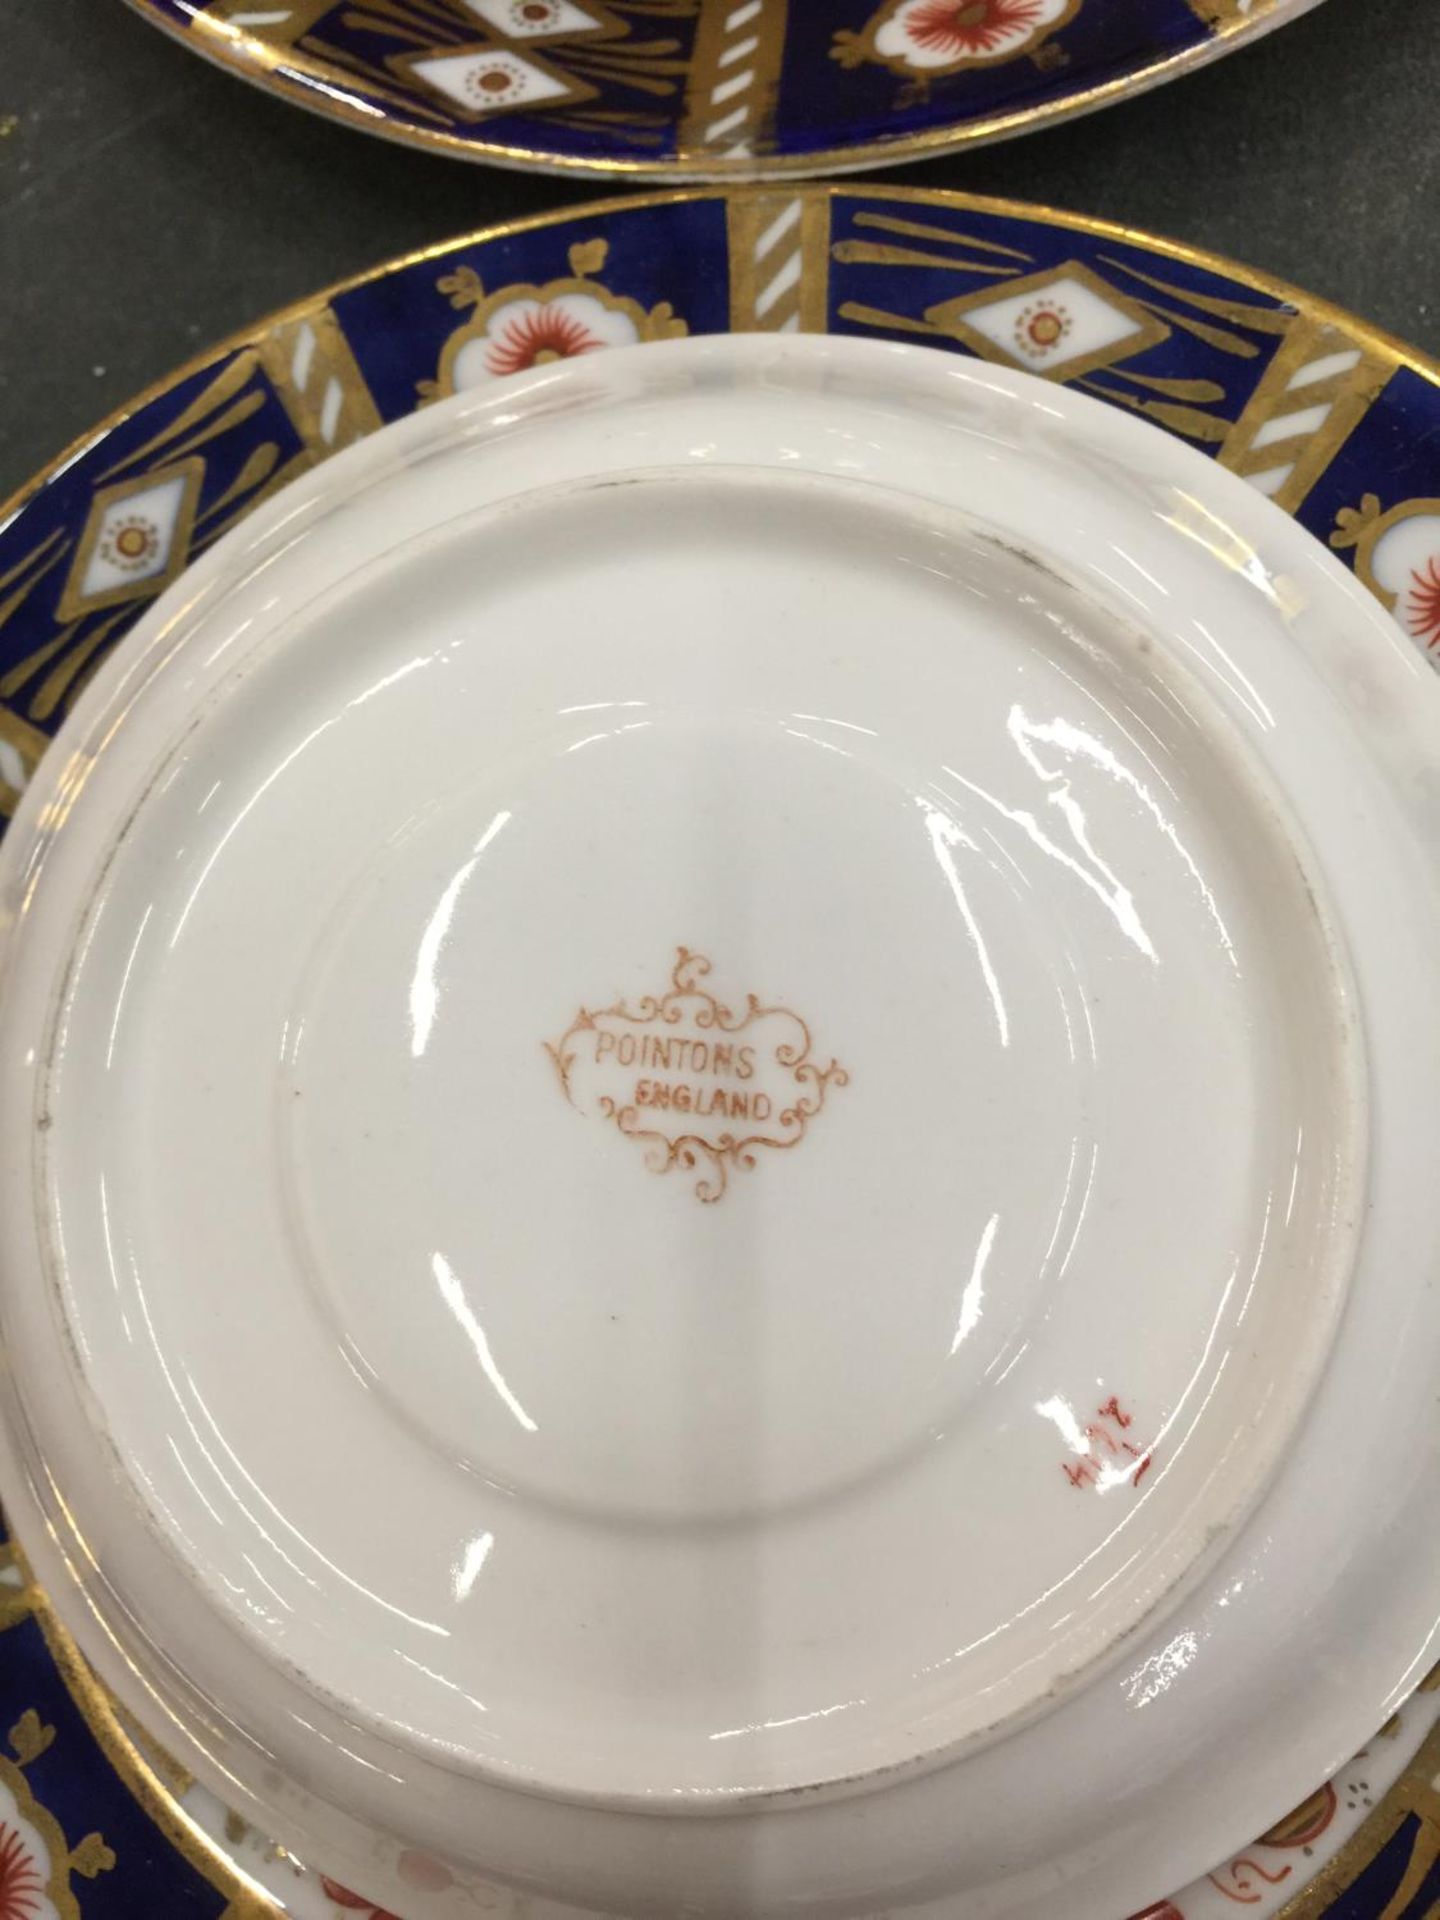 A QUANTITY OF VINTAGE POINTONS CHINA TO INCLUDE A CAKE PLATE, PLATES, SAUCERS, A CREAM JUG AND SUGAR - Image 3 of 8